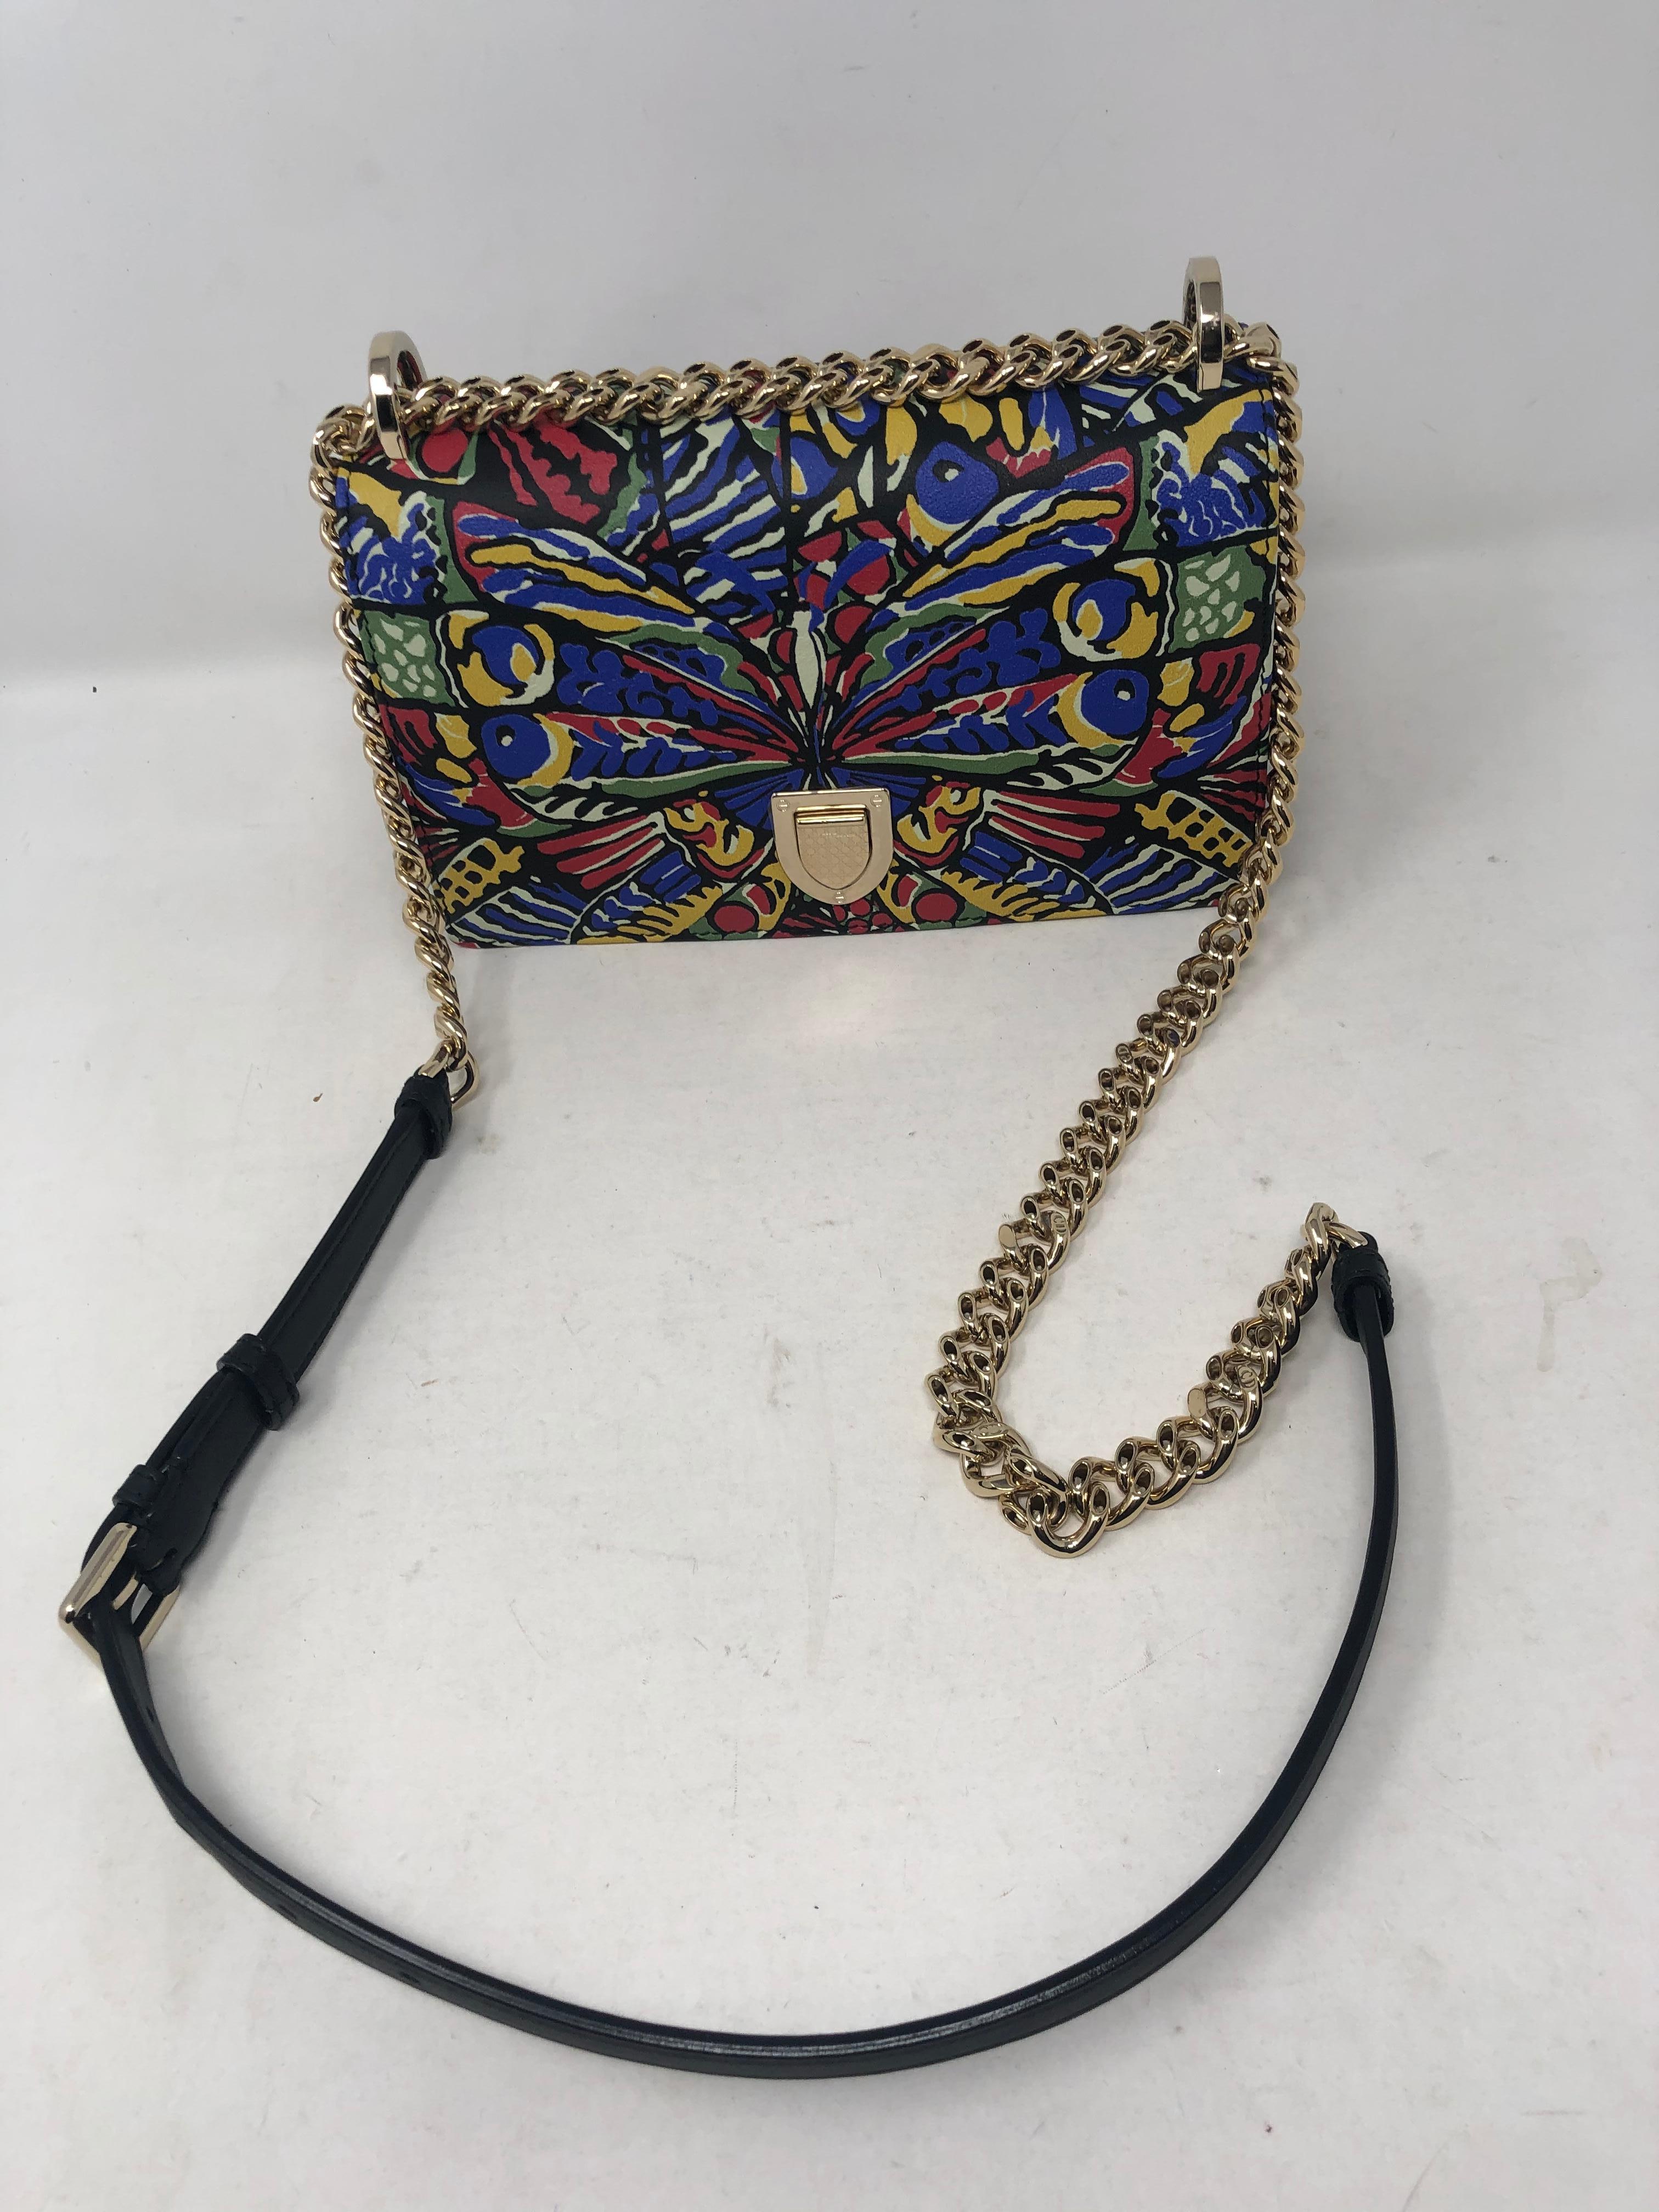 Diorama Butterfly Bag by Christian Dior. Beautiful Butterfly Design printed on leather bag. Gold Diorama hardware and gld tone chain strap with black leather. Can be worn as a crossbody or doubled. Rare and unique bag by Dior. Plenty of room inside